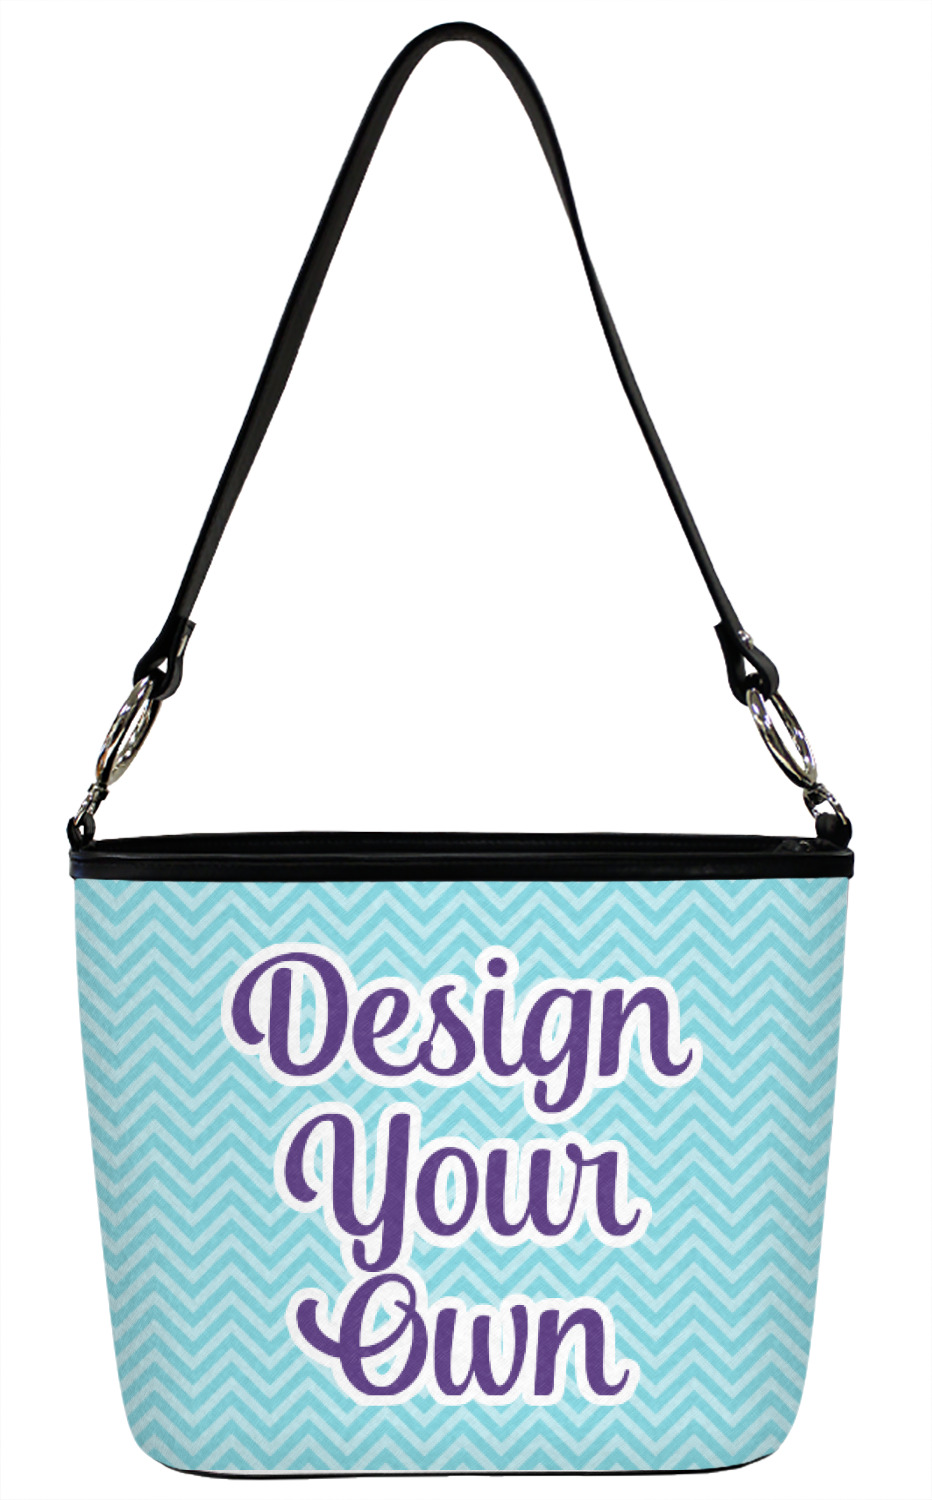 Front & Back Large Personalized Cinco De Mayo Bucket Bag w/Genuine Leather Trim 